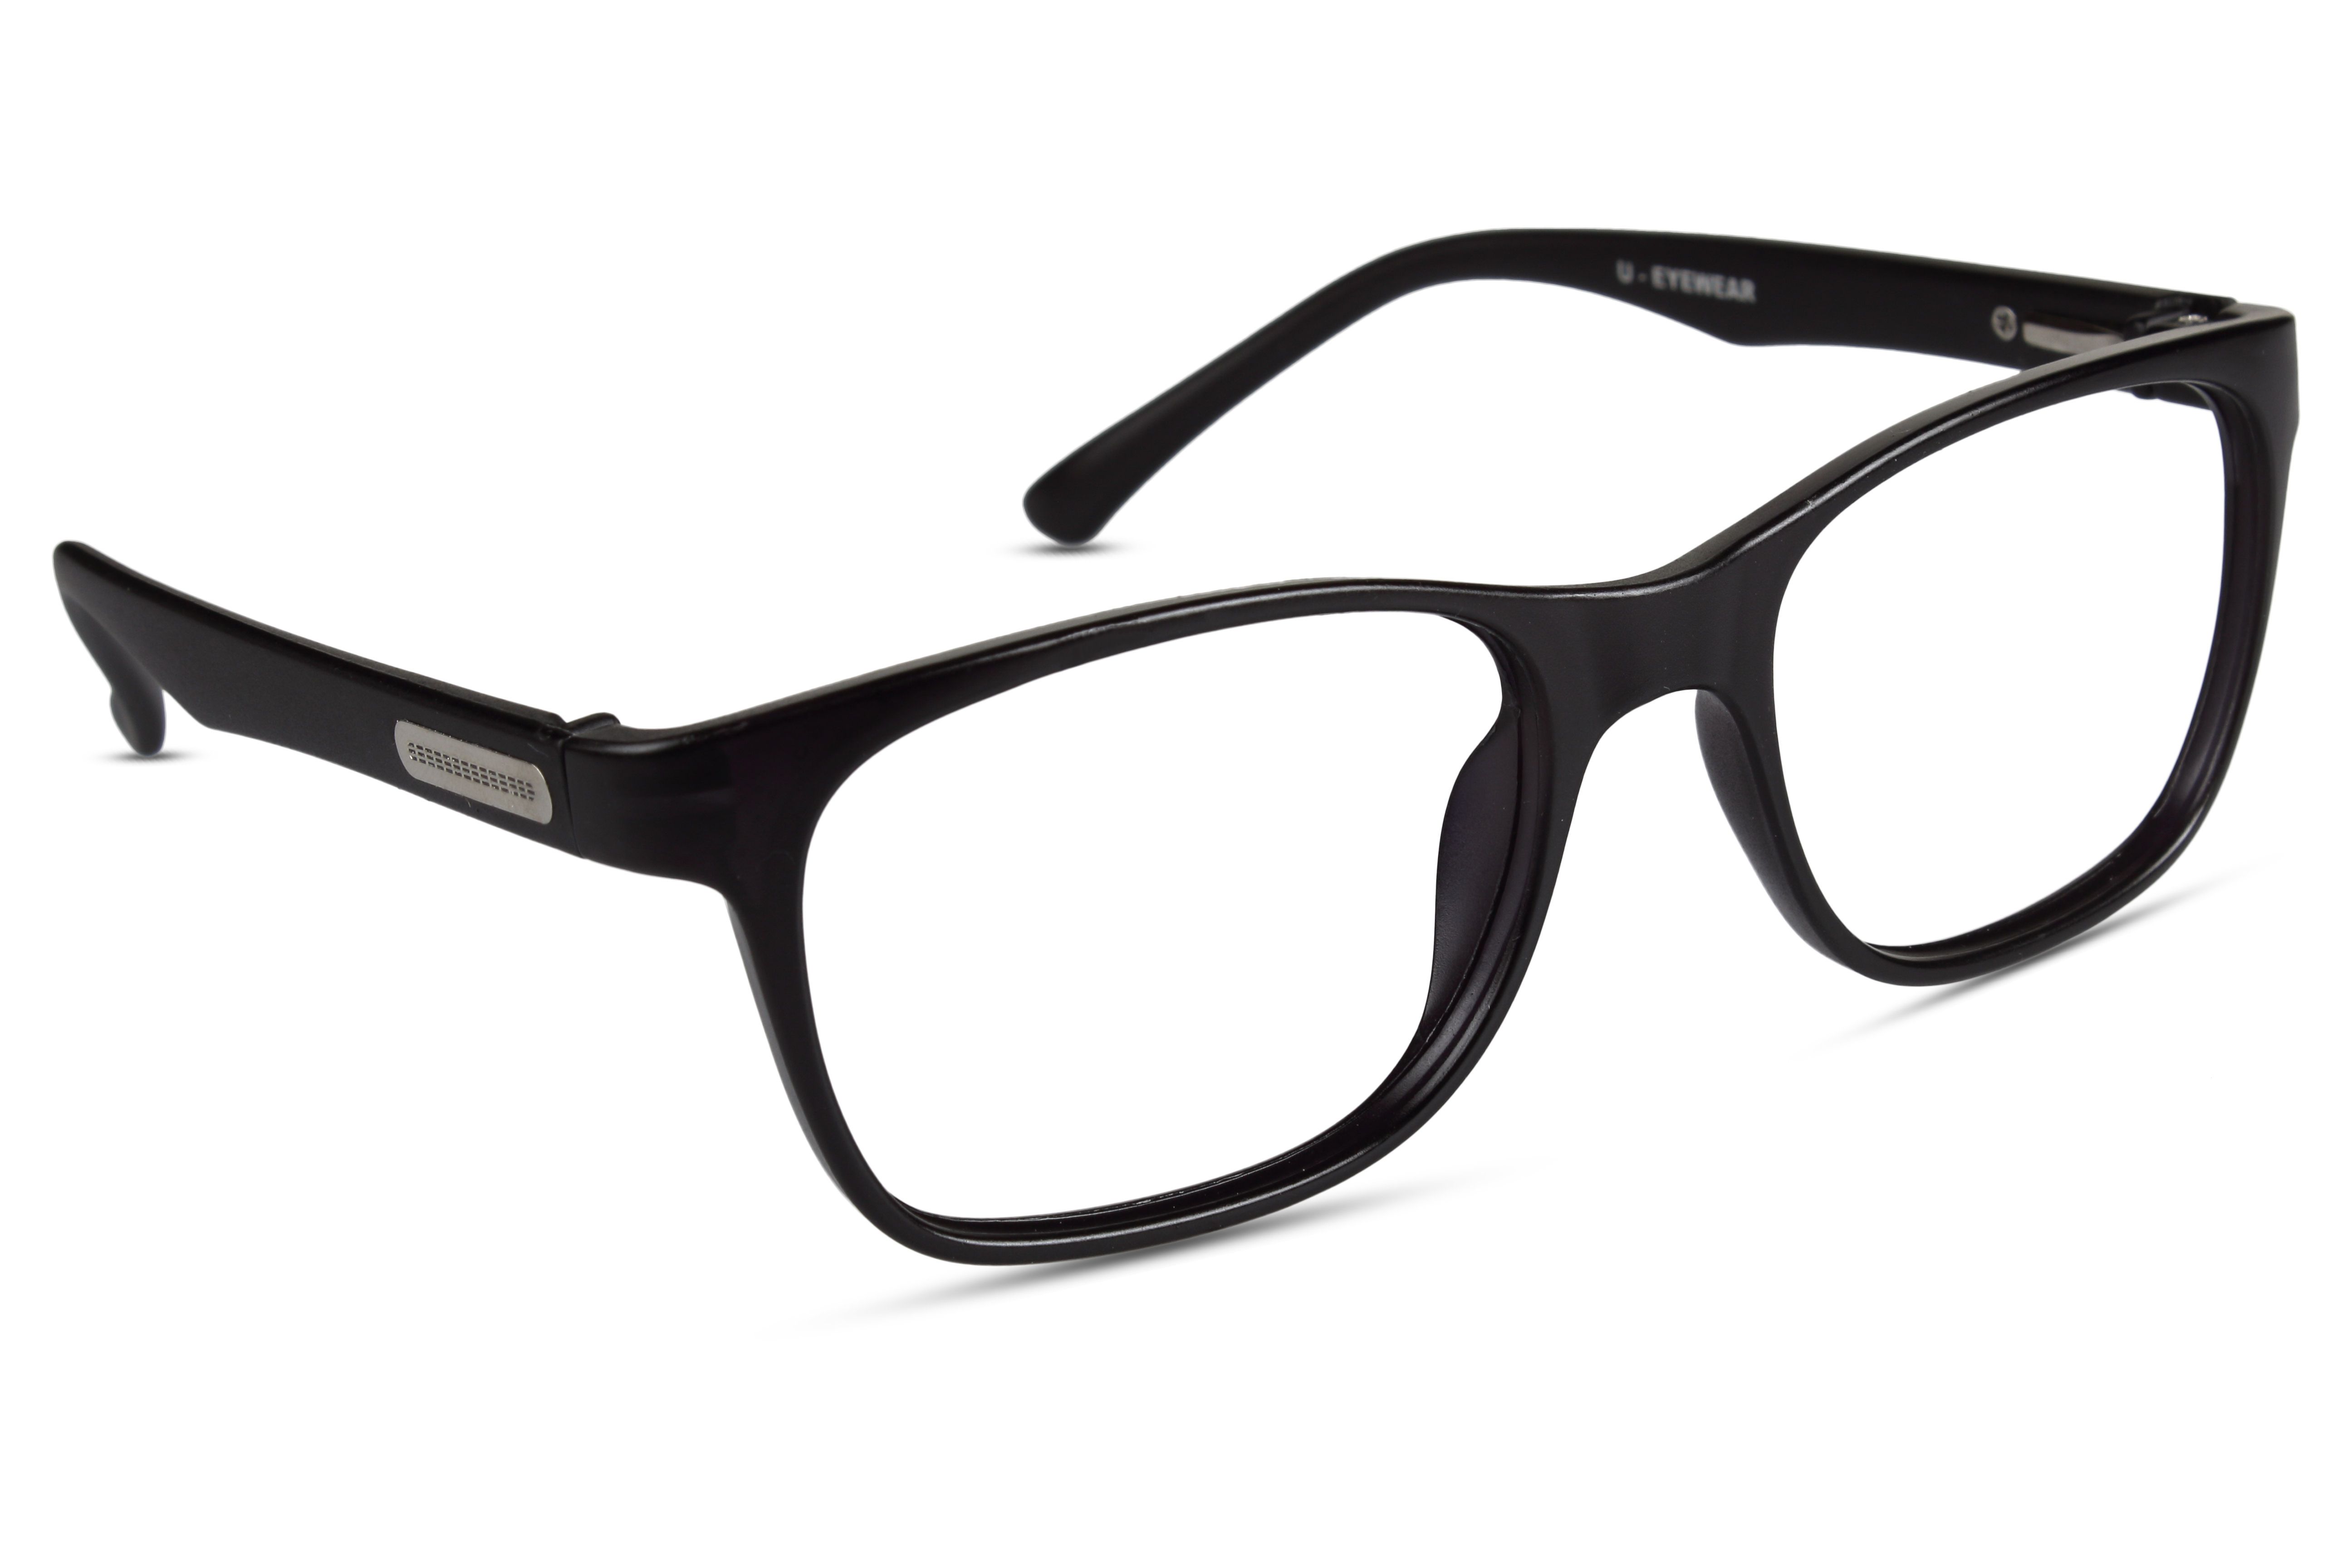 Reactr Square Spectacle Frame Buy Reactr Square Spectacle Frame Eyewearlabs 4855